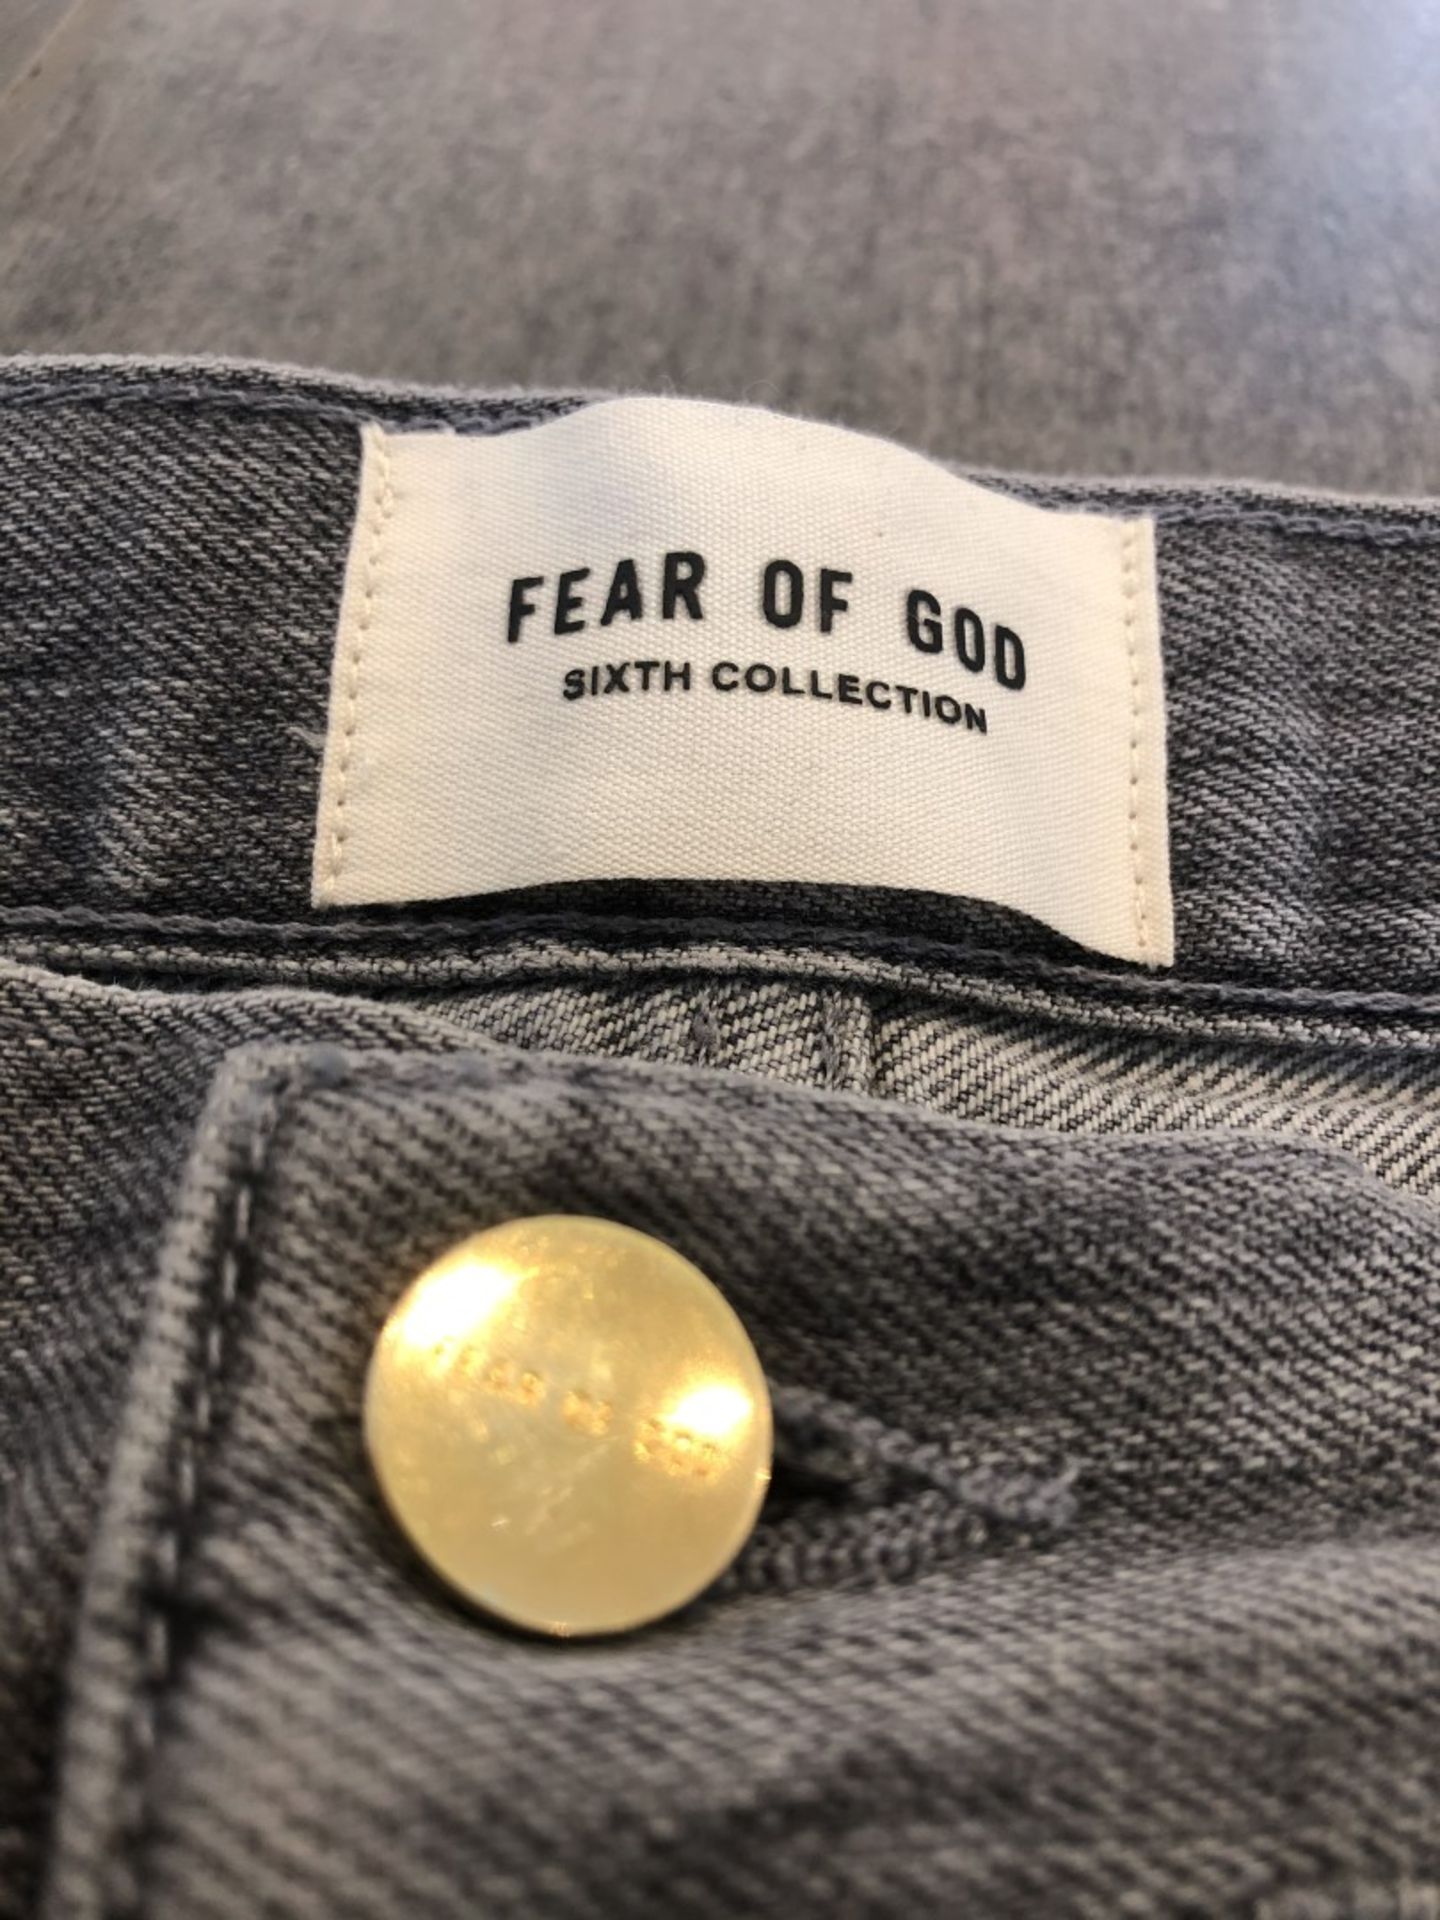 1 x Pair Of Men's Genuine Fear Of God Jeans - Grey With Rips - Size (EU/UK): 32/33/32/33 - - Image 4 of 7